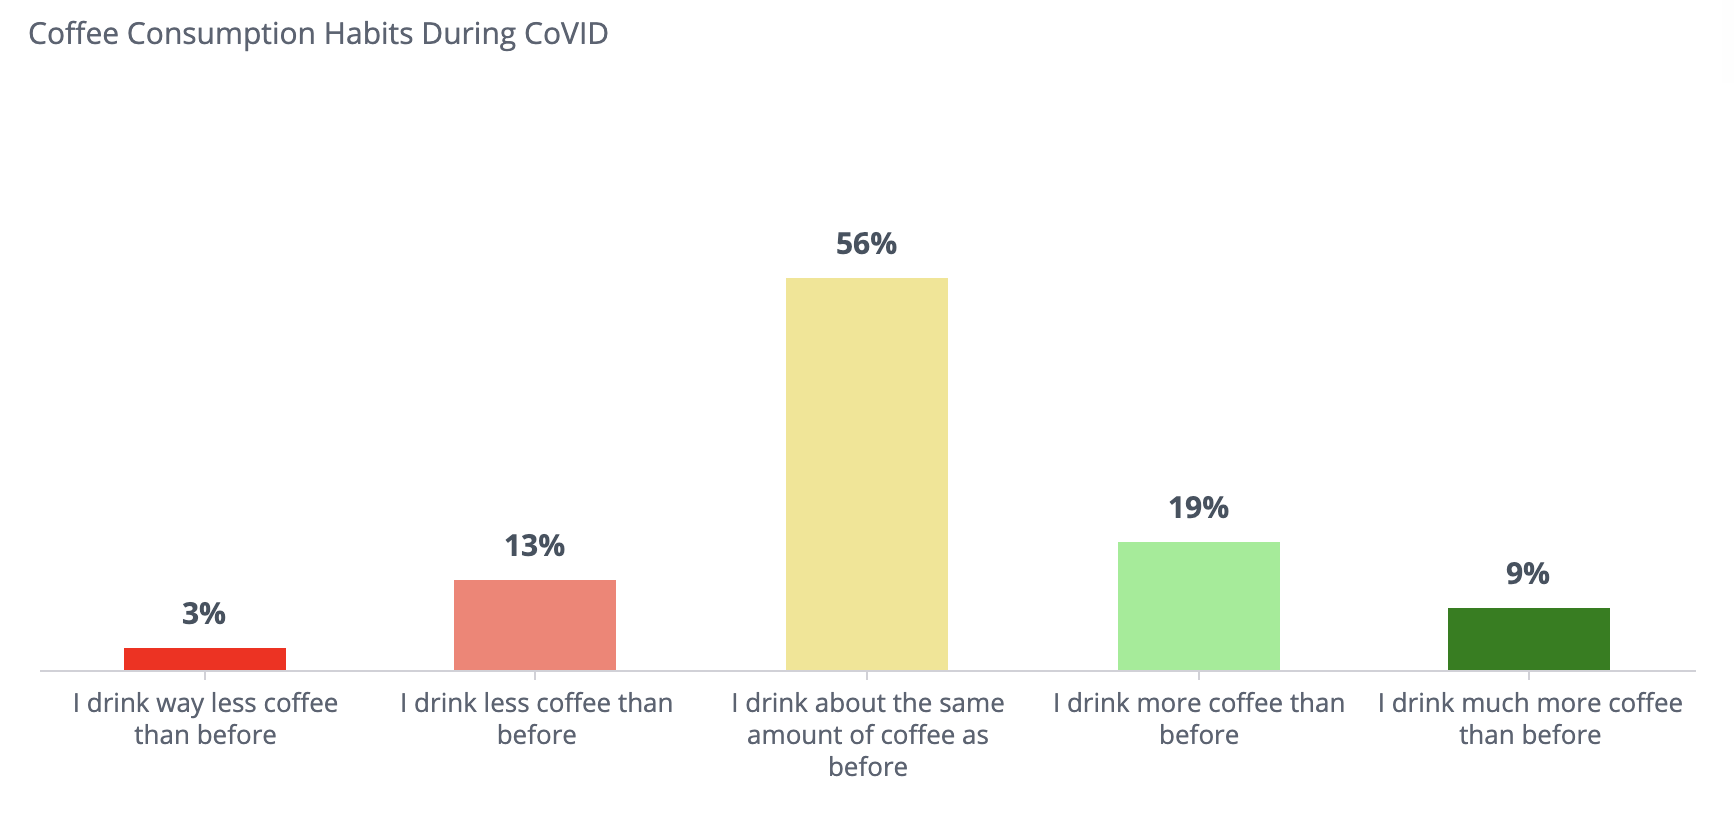 coffee consumption habits during COVID